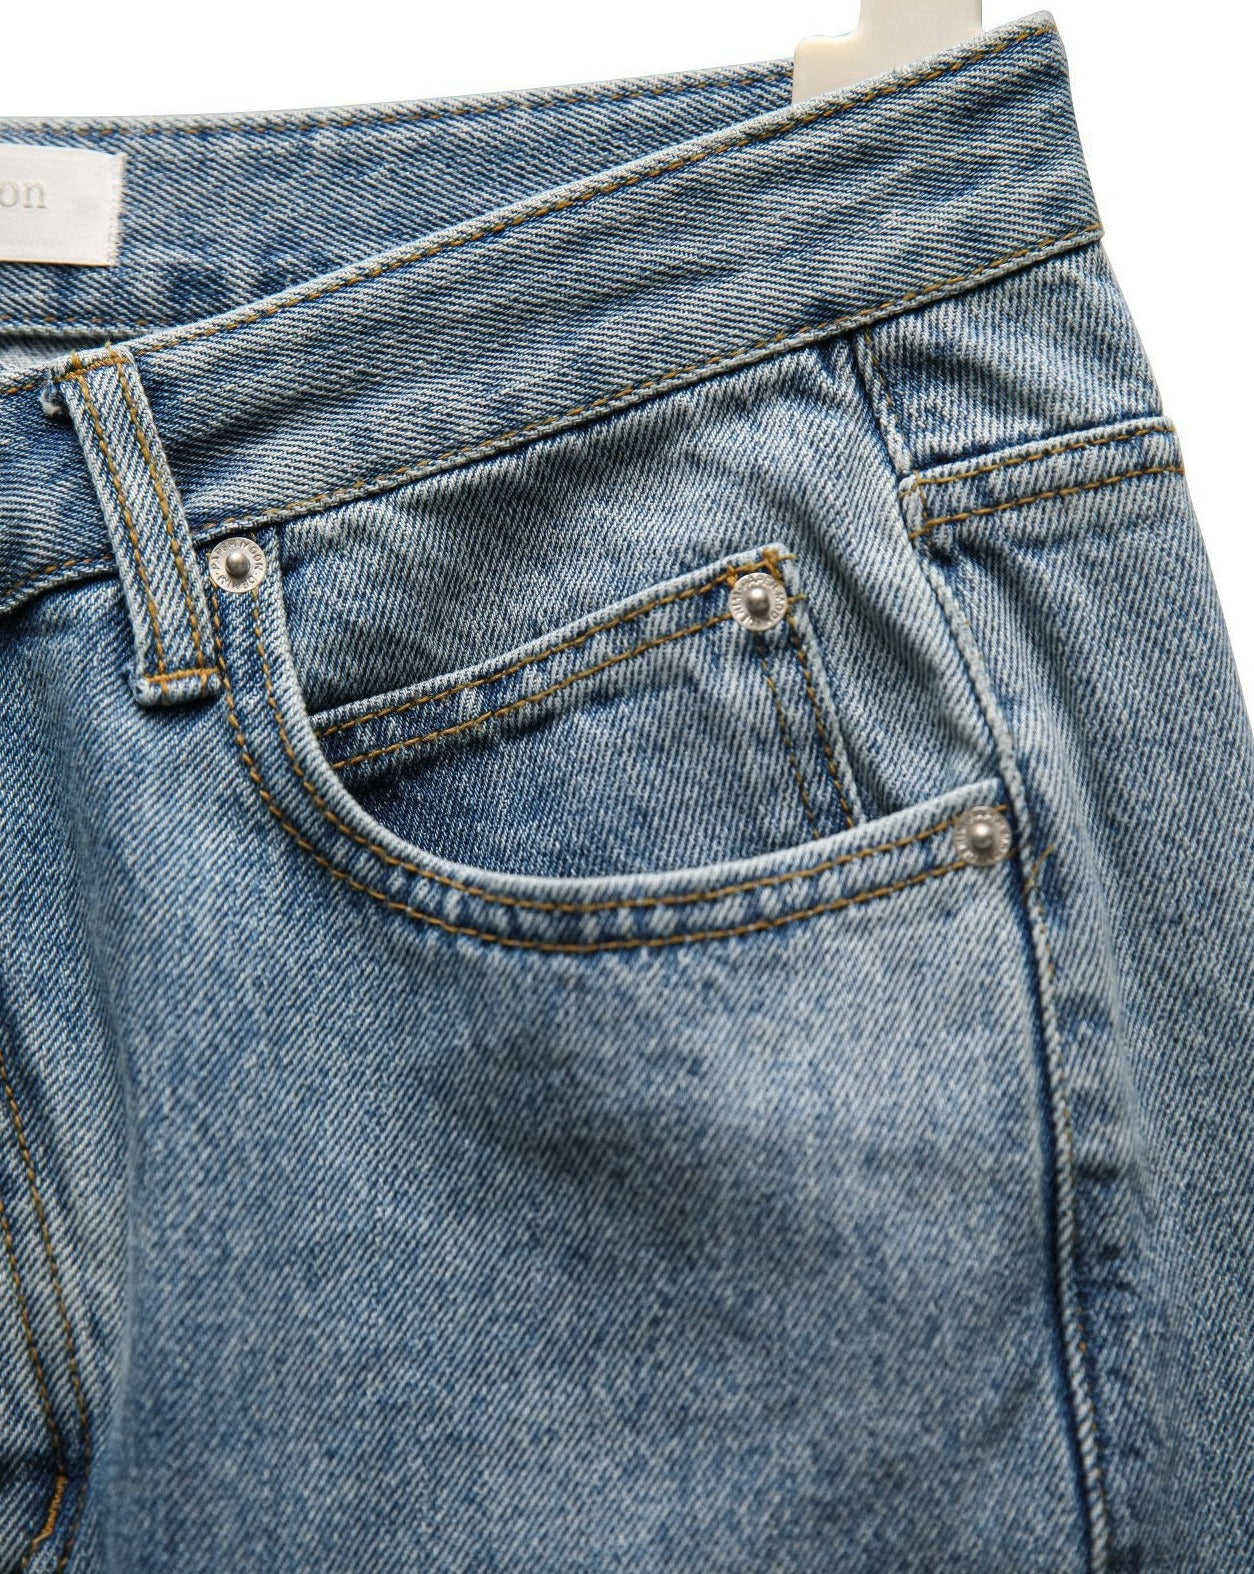 【PAPERMOON 페이퍼 문】SS / Wrap Button Fly Straight Denim Jeans